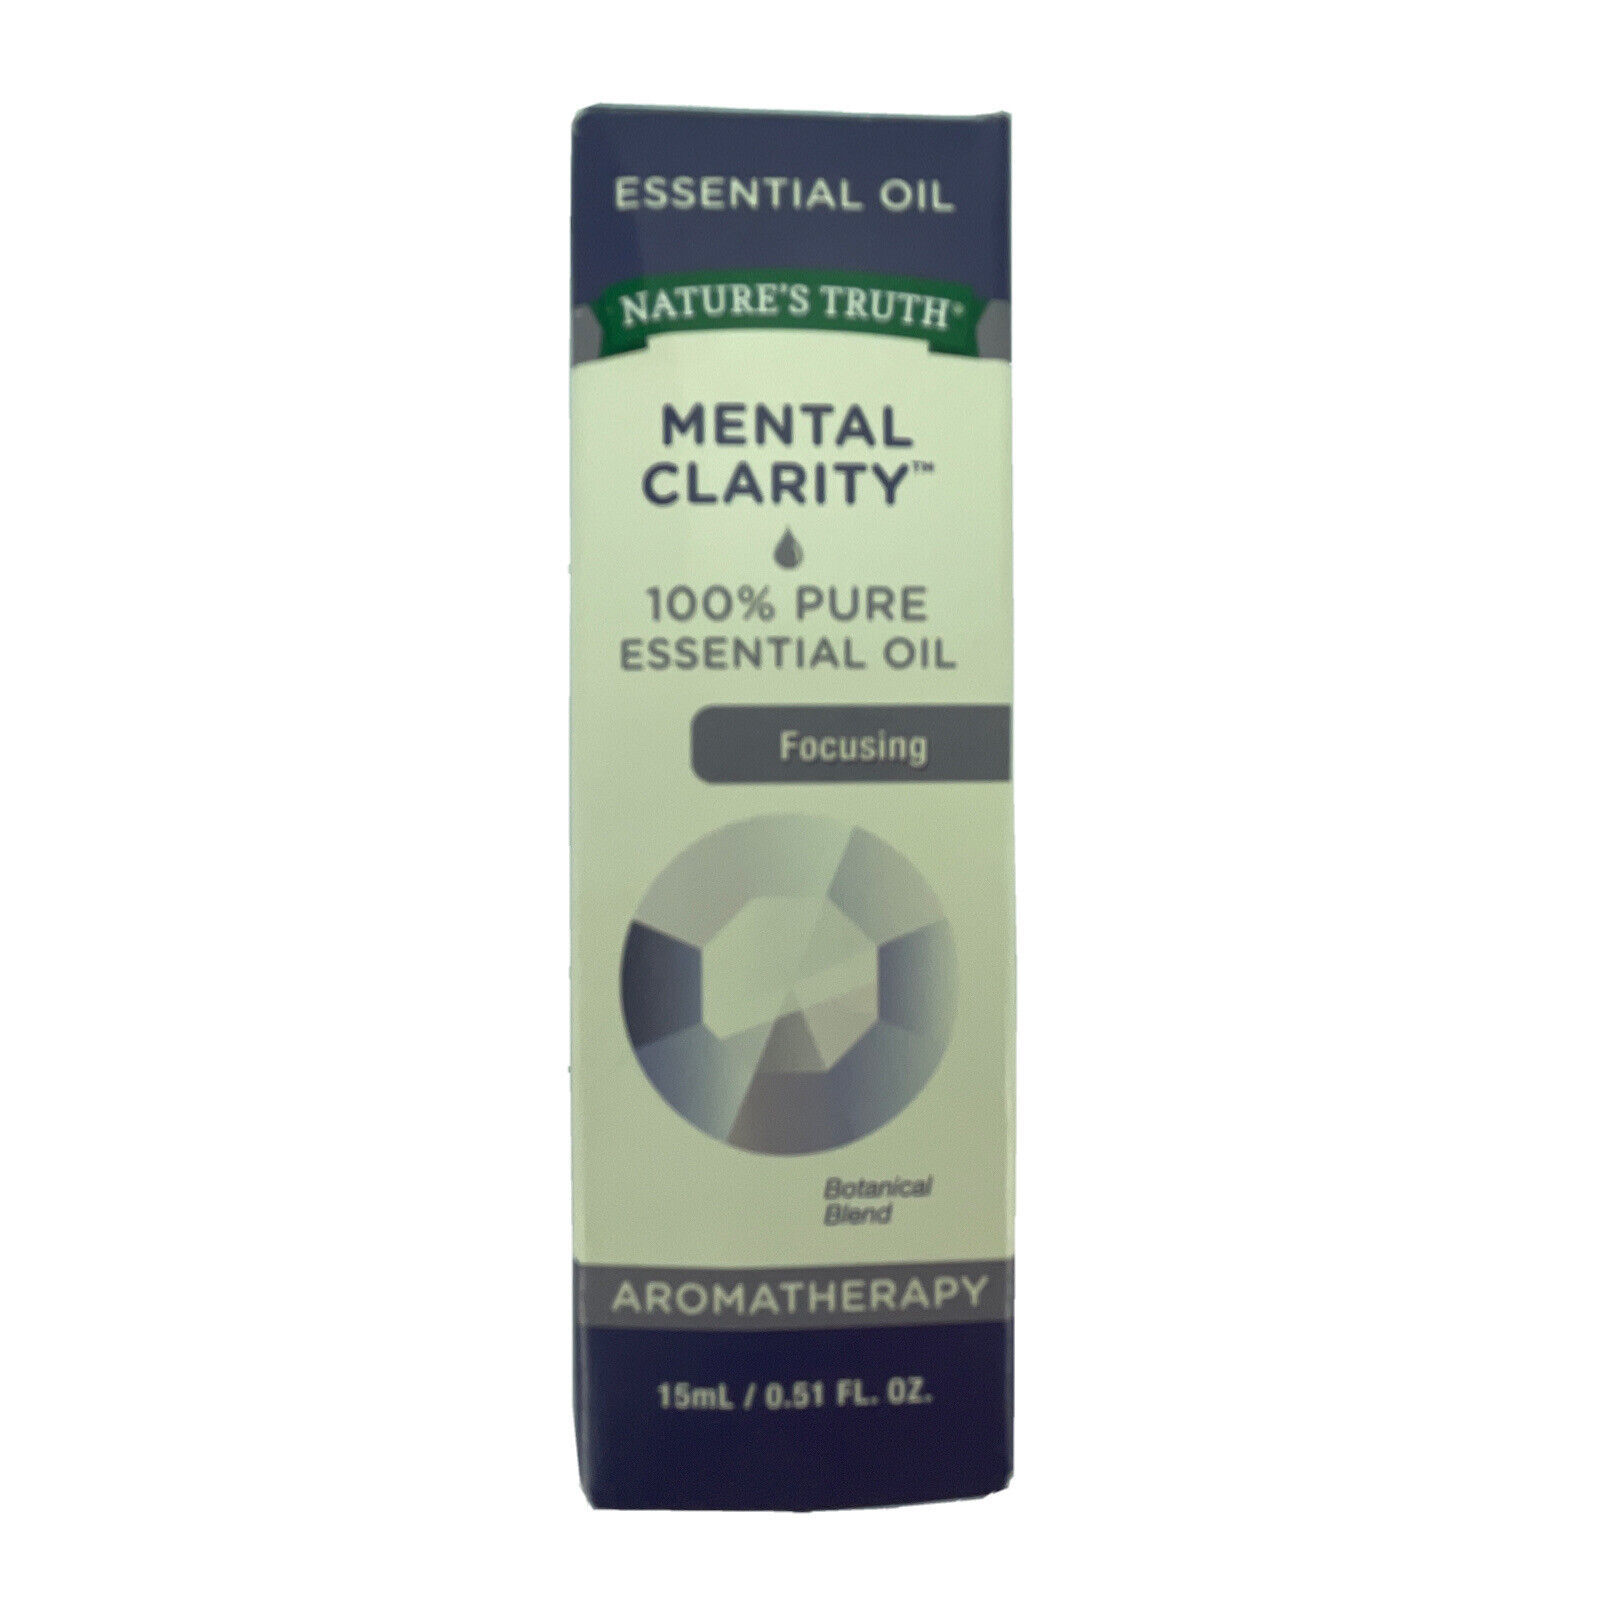 Nature's Truth 100% Essential Oil Mental Clarity 0.51 Fluid Ounce Aromatherapy - $6.40